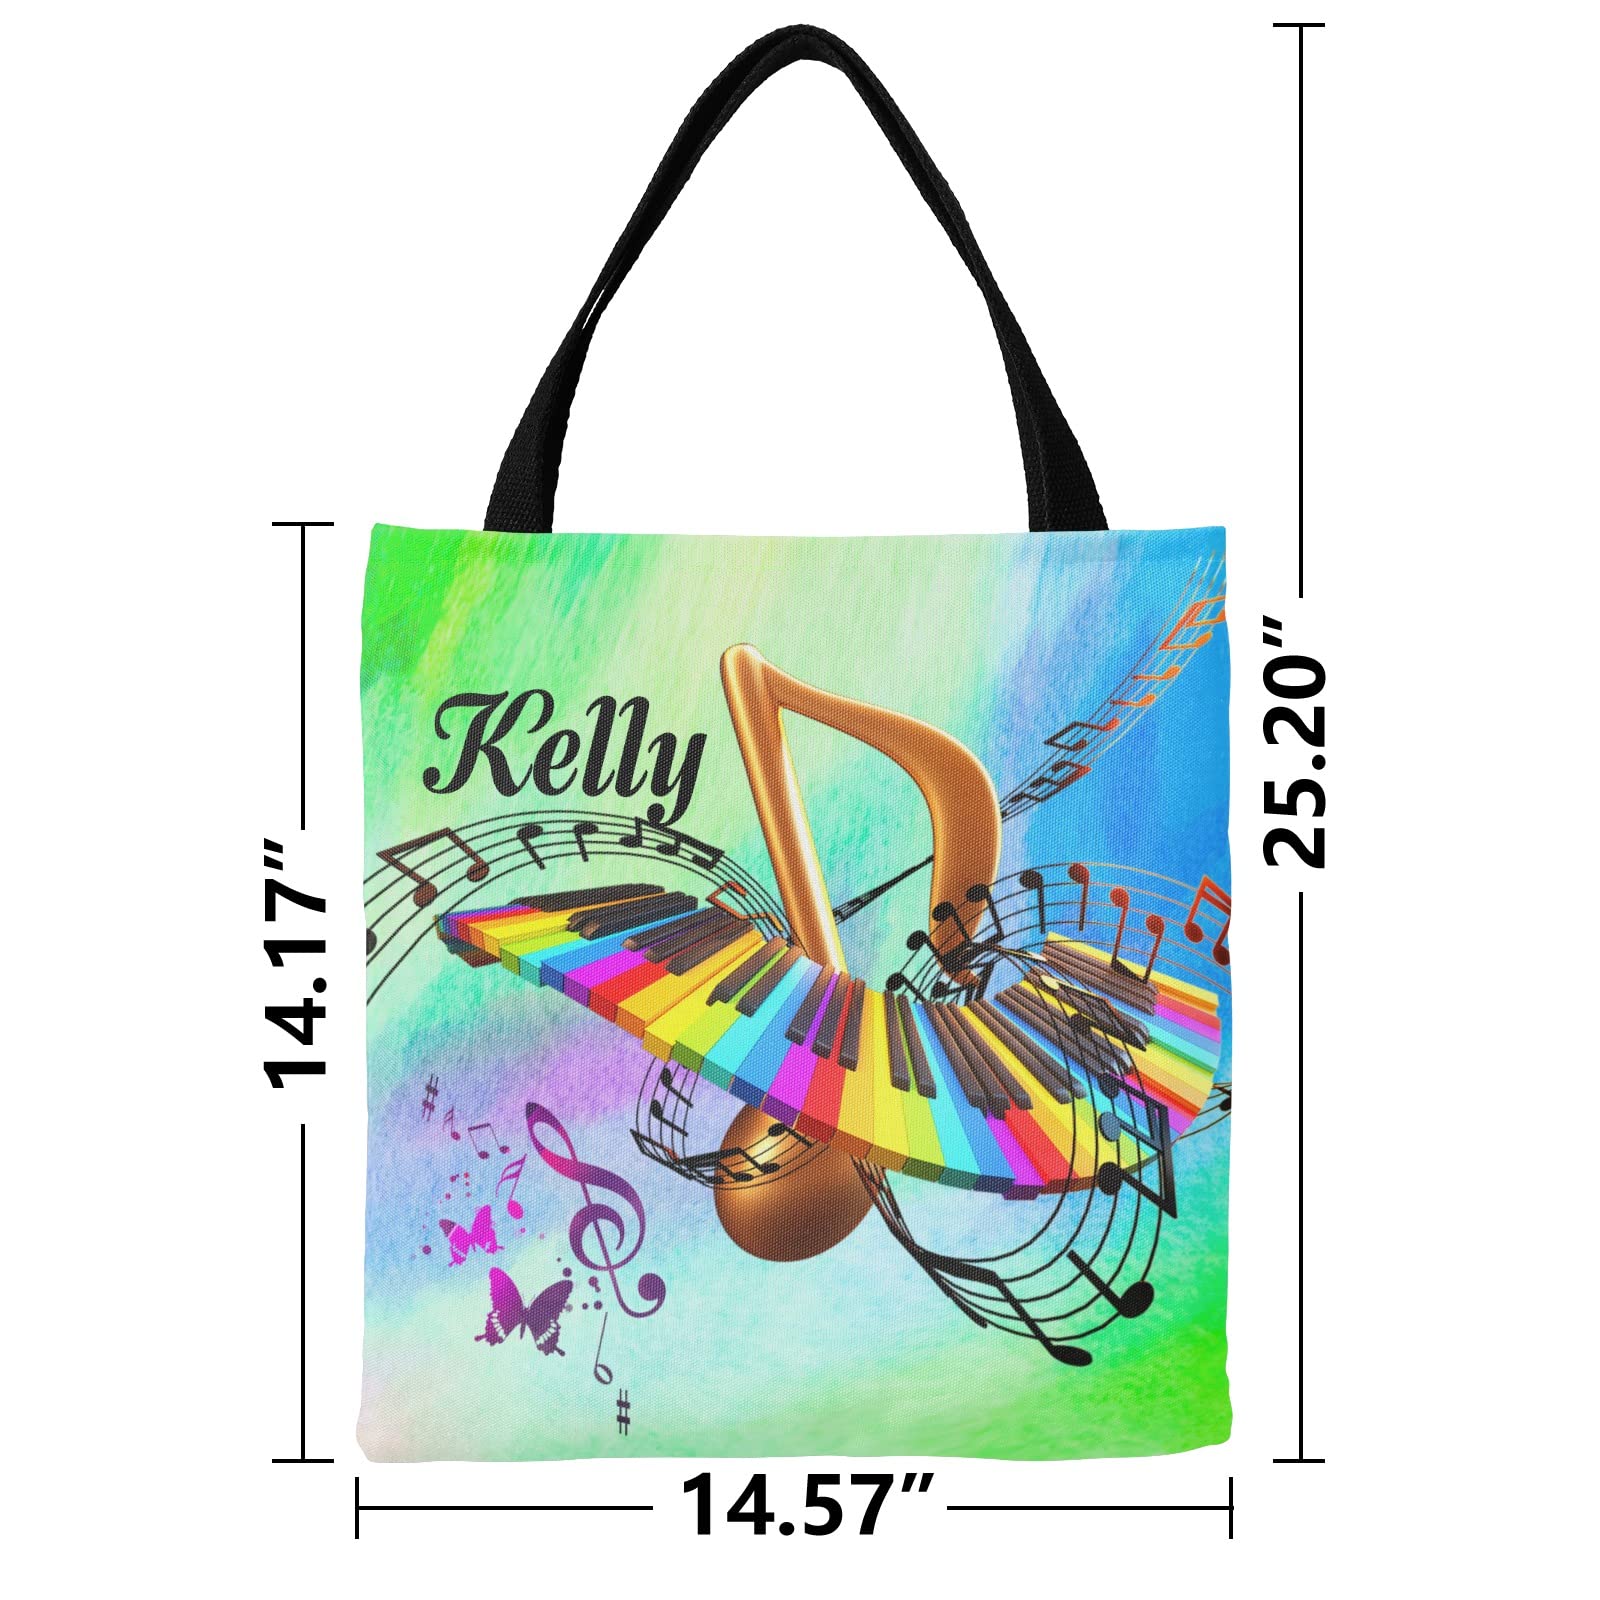 CUXWEOT Personalized Canvas Tote Bag Colorful Music Note Shopping Reusable Grocery Bag Shoulder Bags for Women Girl Gift